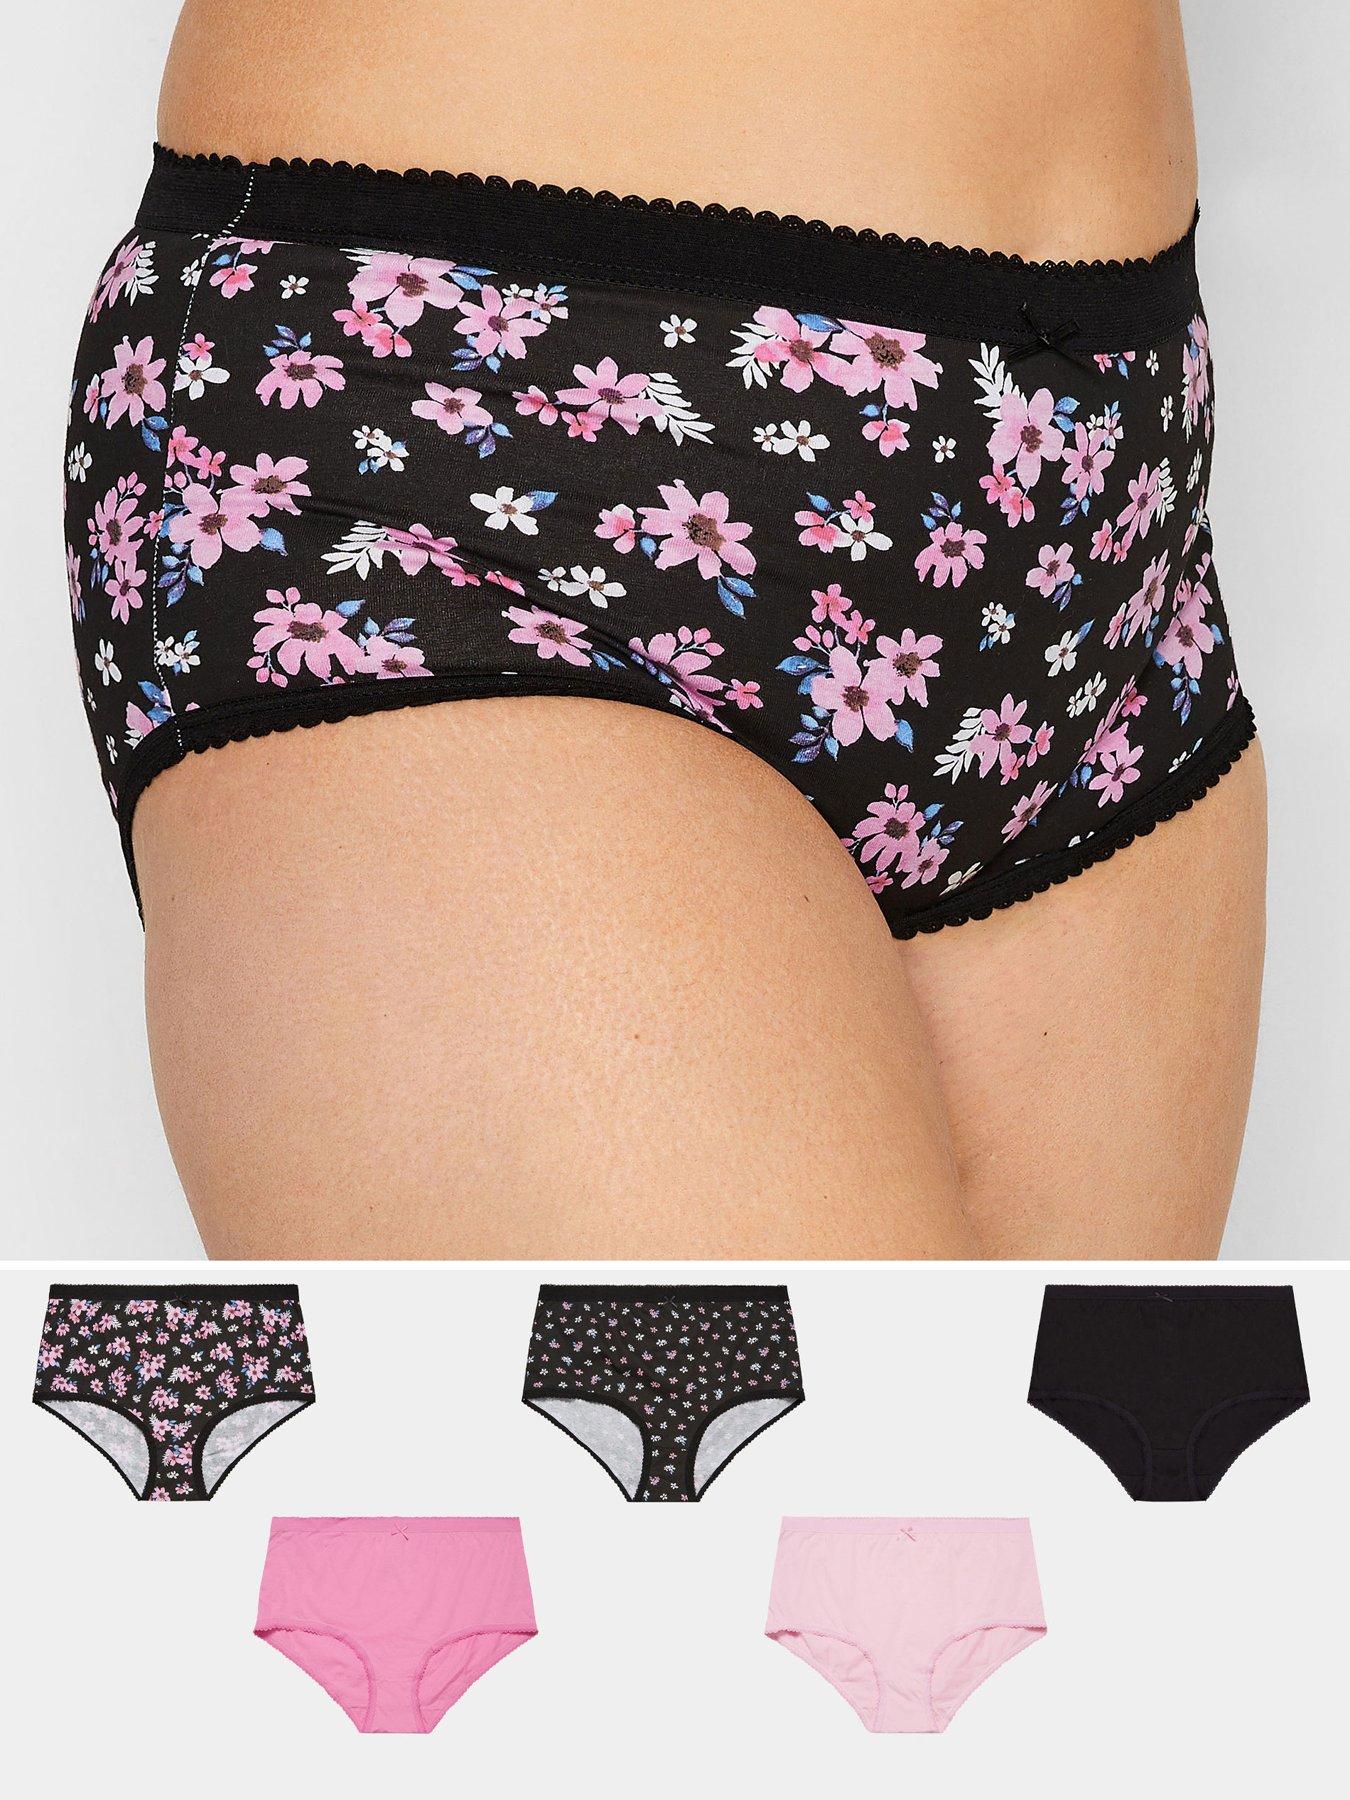 M&S LIMITED COLLECTION 2 Pack Spotted Mesh Brazilian Knickers Size